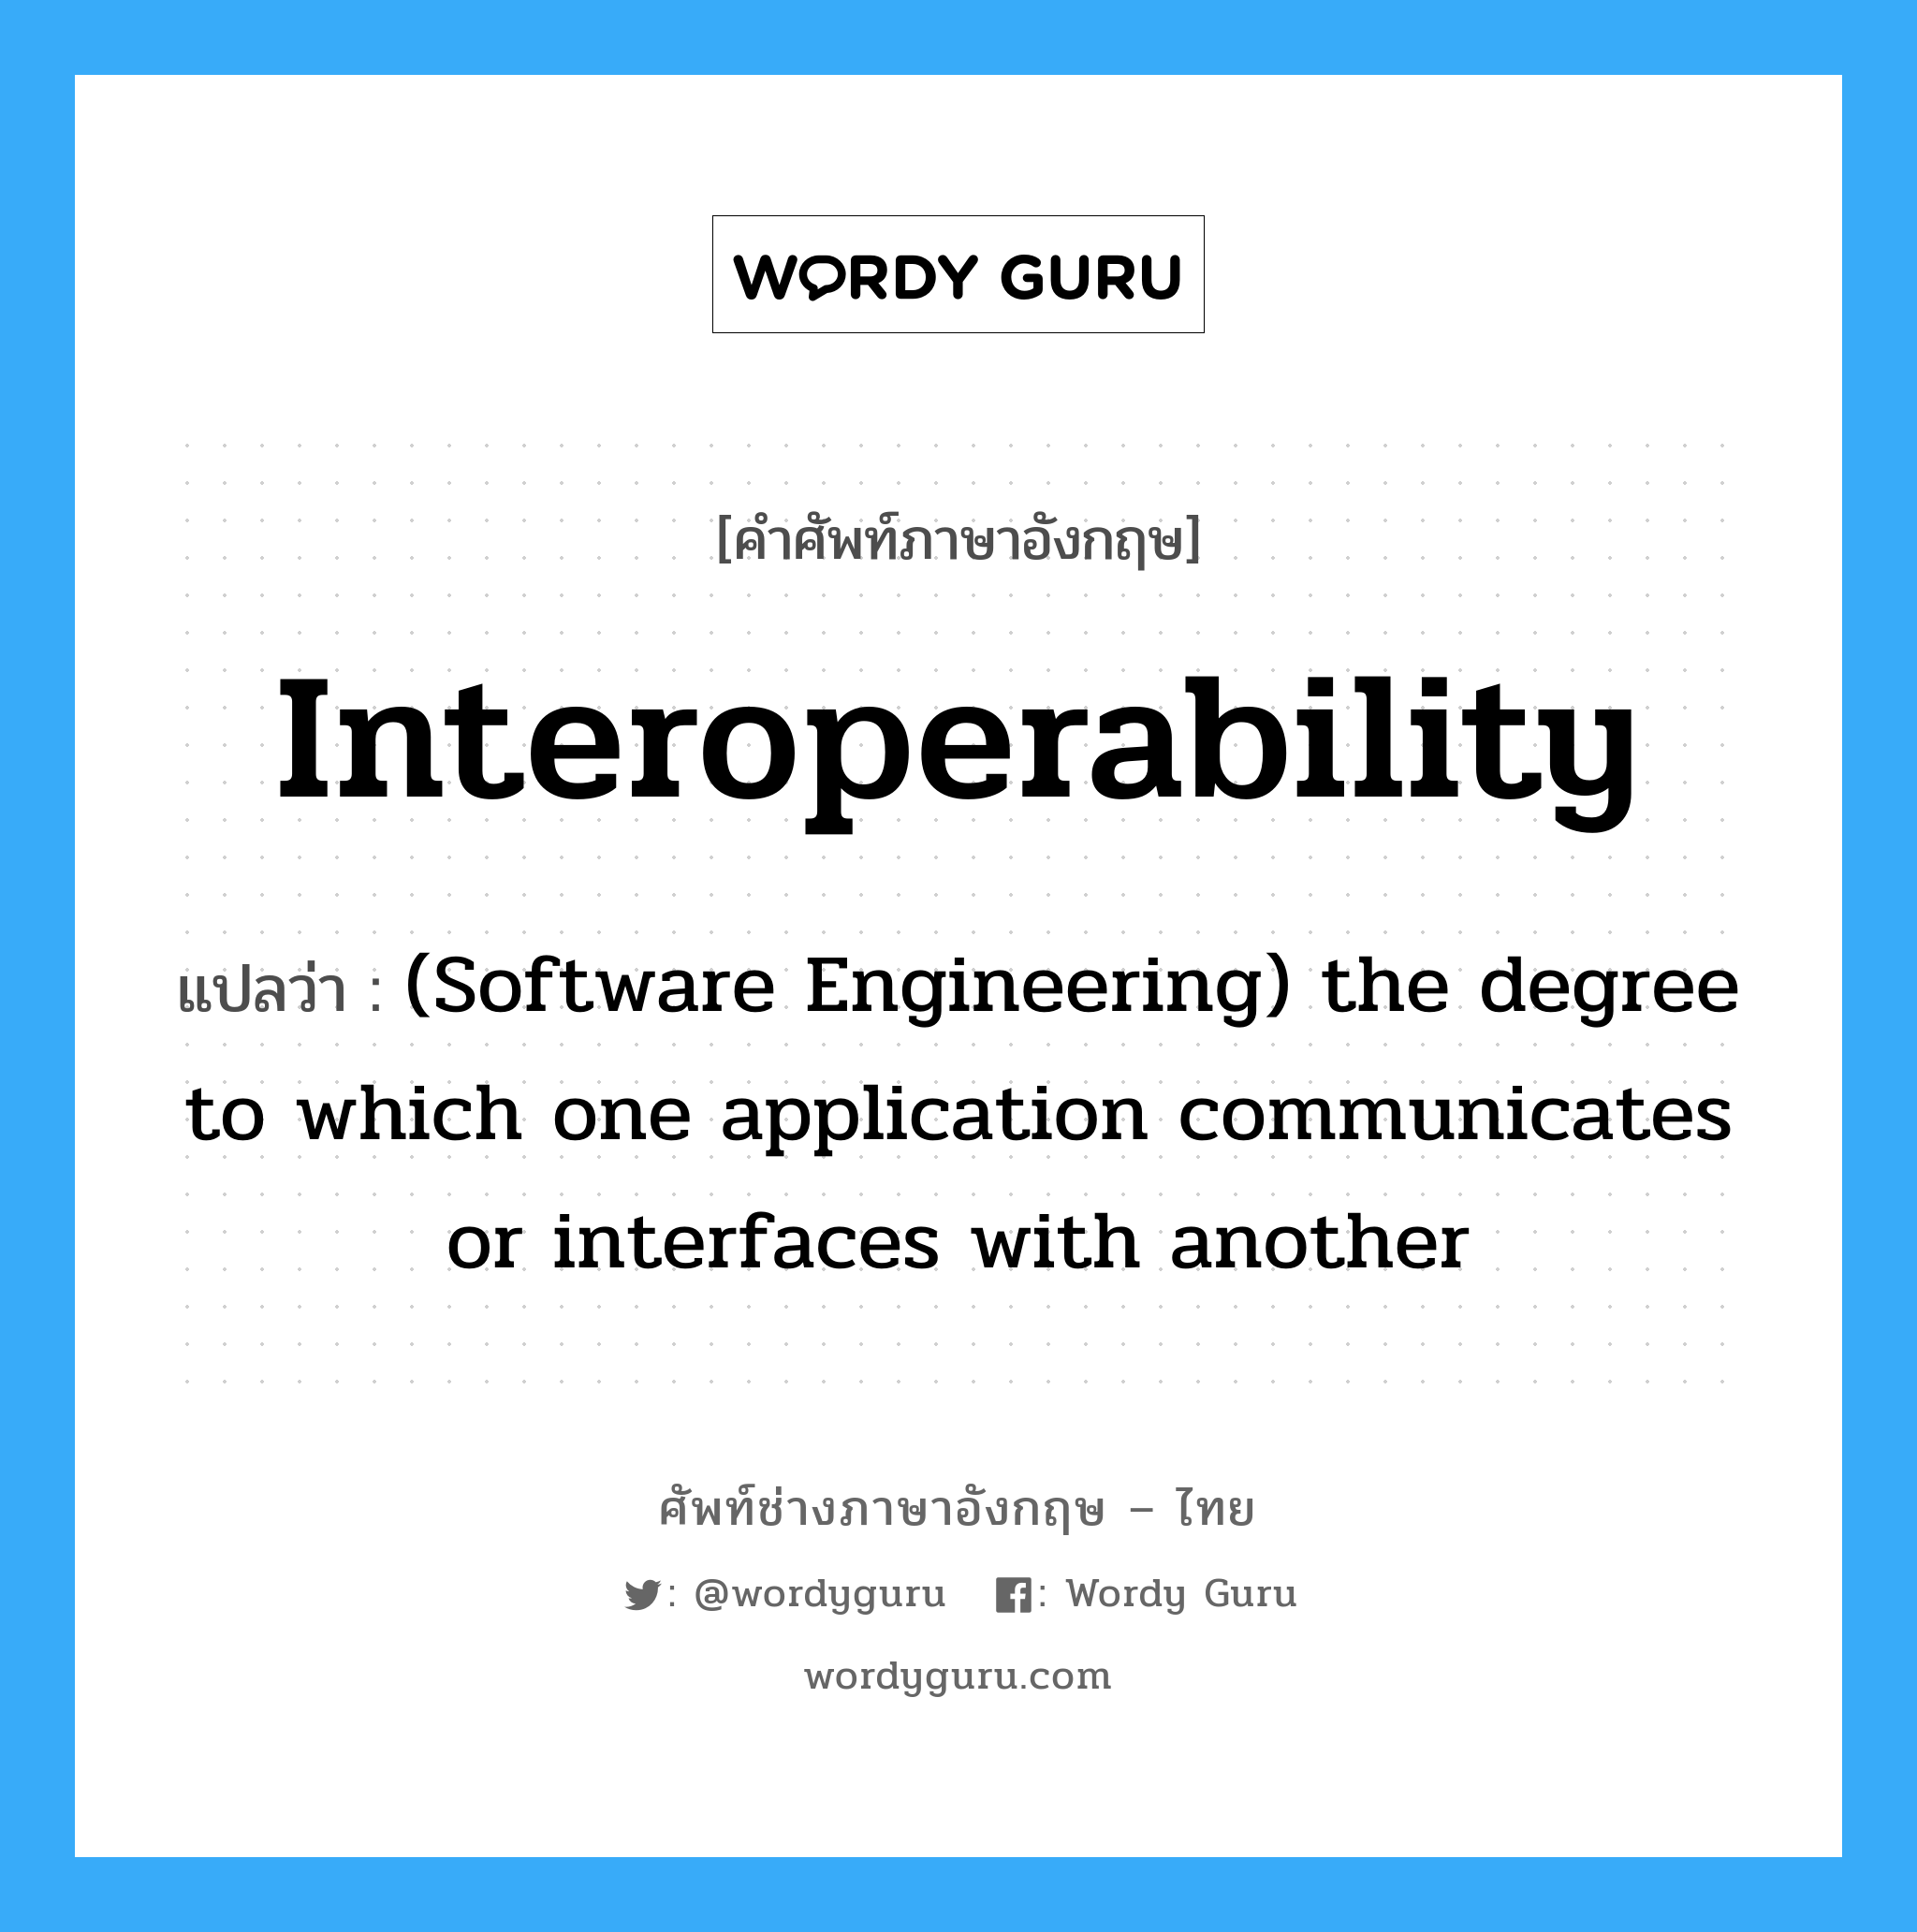 (Software Engineering) the degree to which one application communicates or interfaces with another ภาษาอังกฤษ?, คำศัพท์ช่างภาษาอังกฤษ - ไทย (Software Engineering) the degree to which one application communicates or interfaces with another คำศัพท์ภาษาอังกฤษ (Software Engineering) the degree to which one application communicates or interfaces with another แปลว่า Interoperability